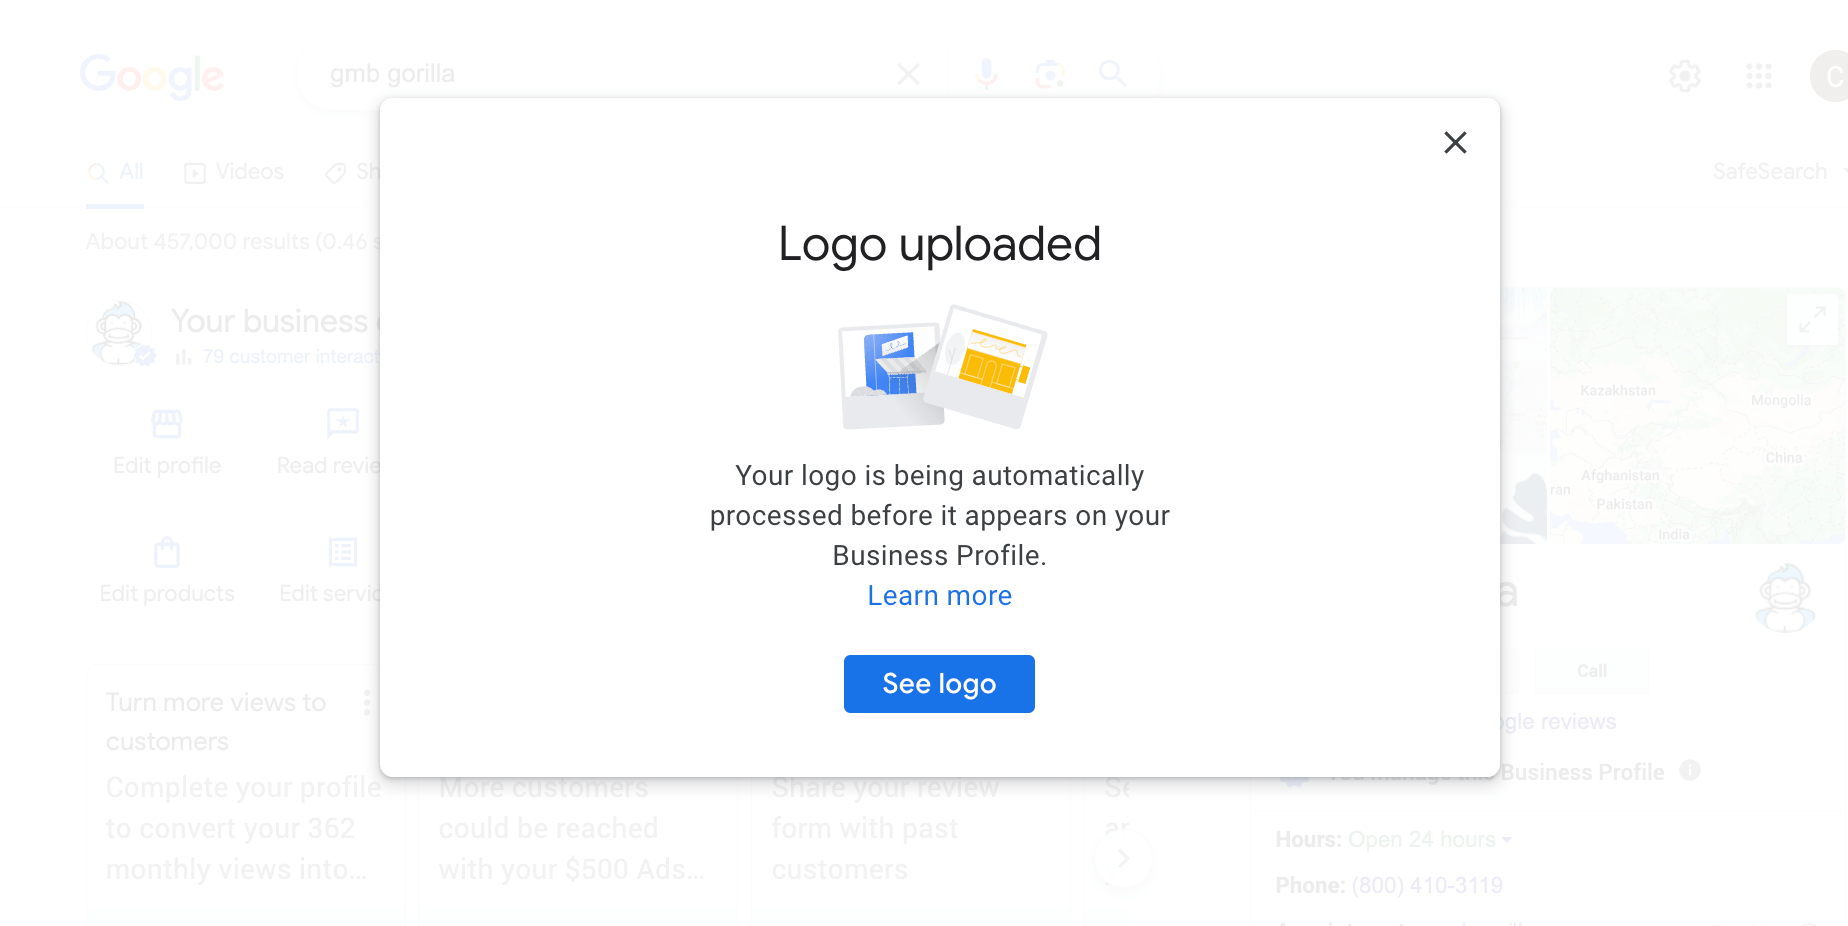 image of logo updated screen on Google Business Profile